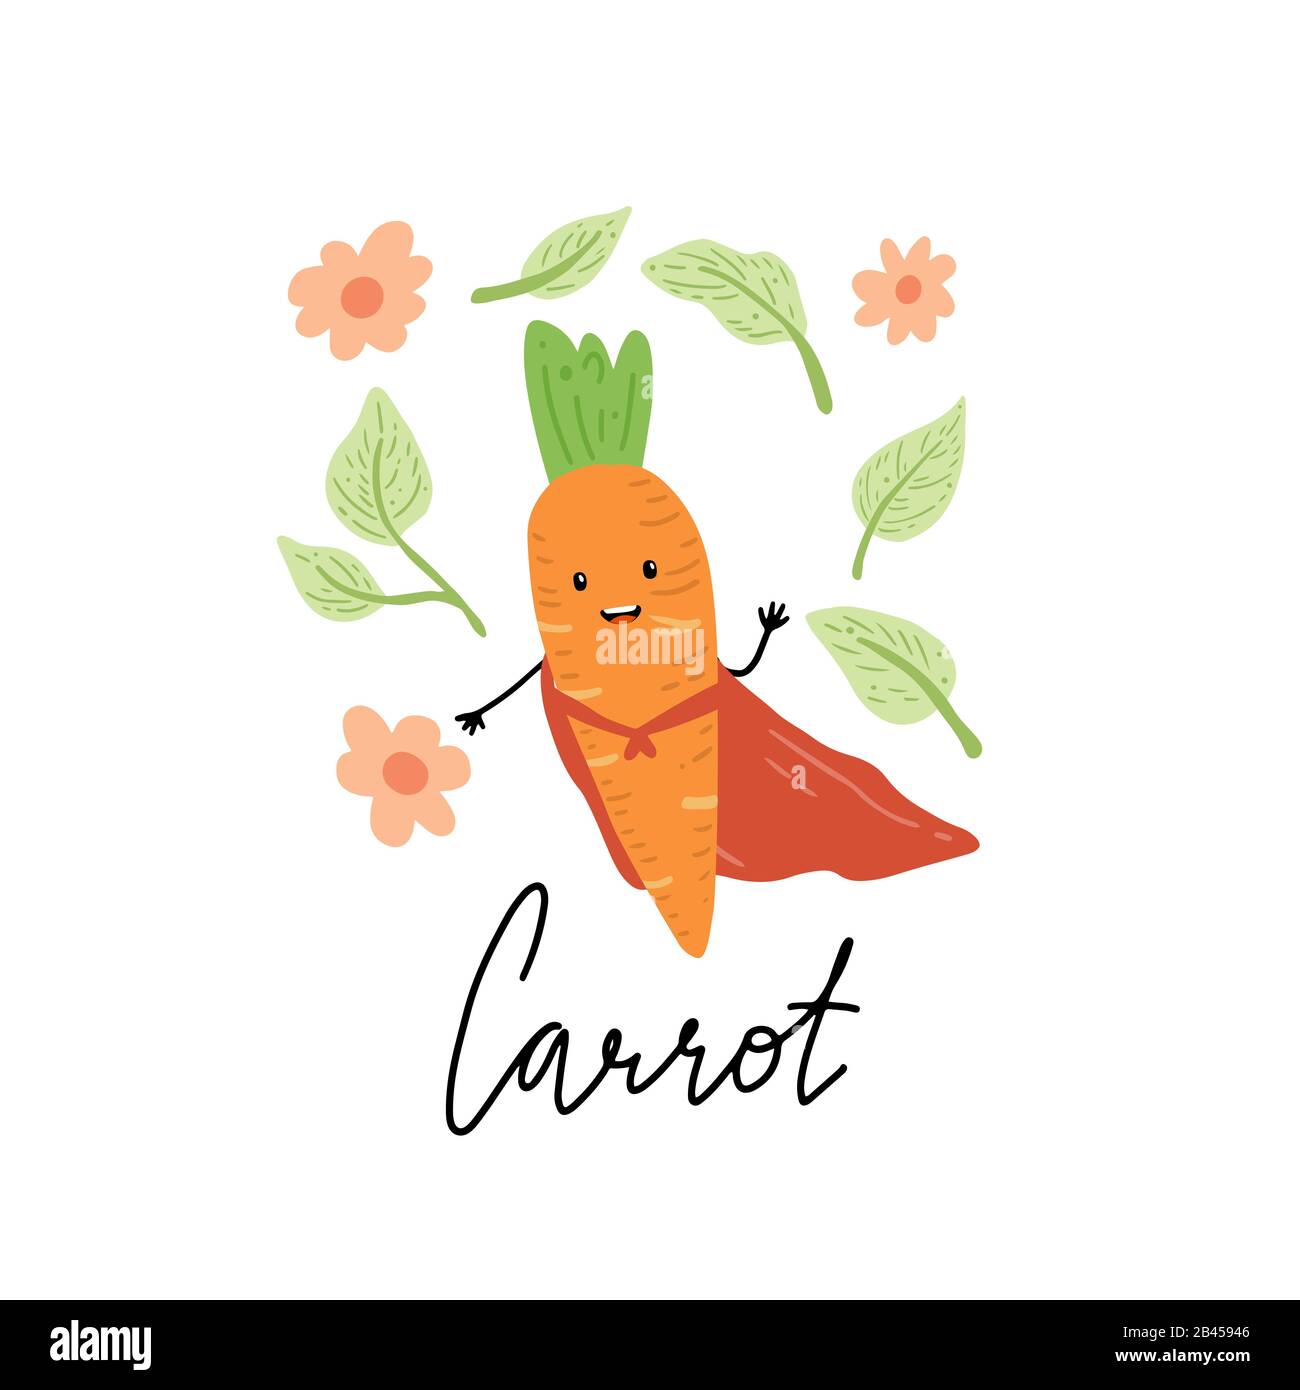 Carrot funny super hero cartoon character. Vector illustration isolated. Concept of healthy food, vegetarian. Carrot have abstract, simple cartoon, hand drawn style. Stock Vector